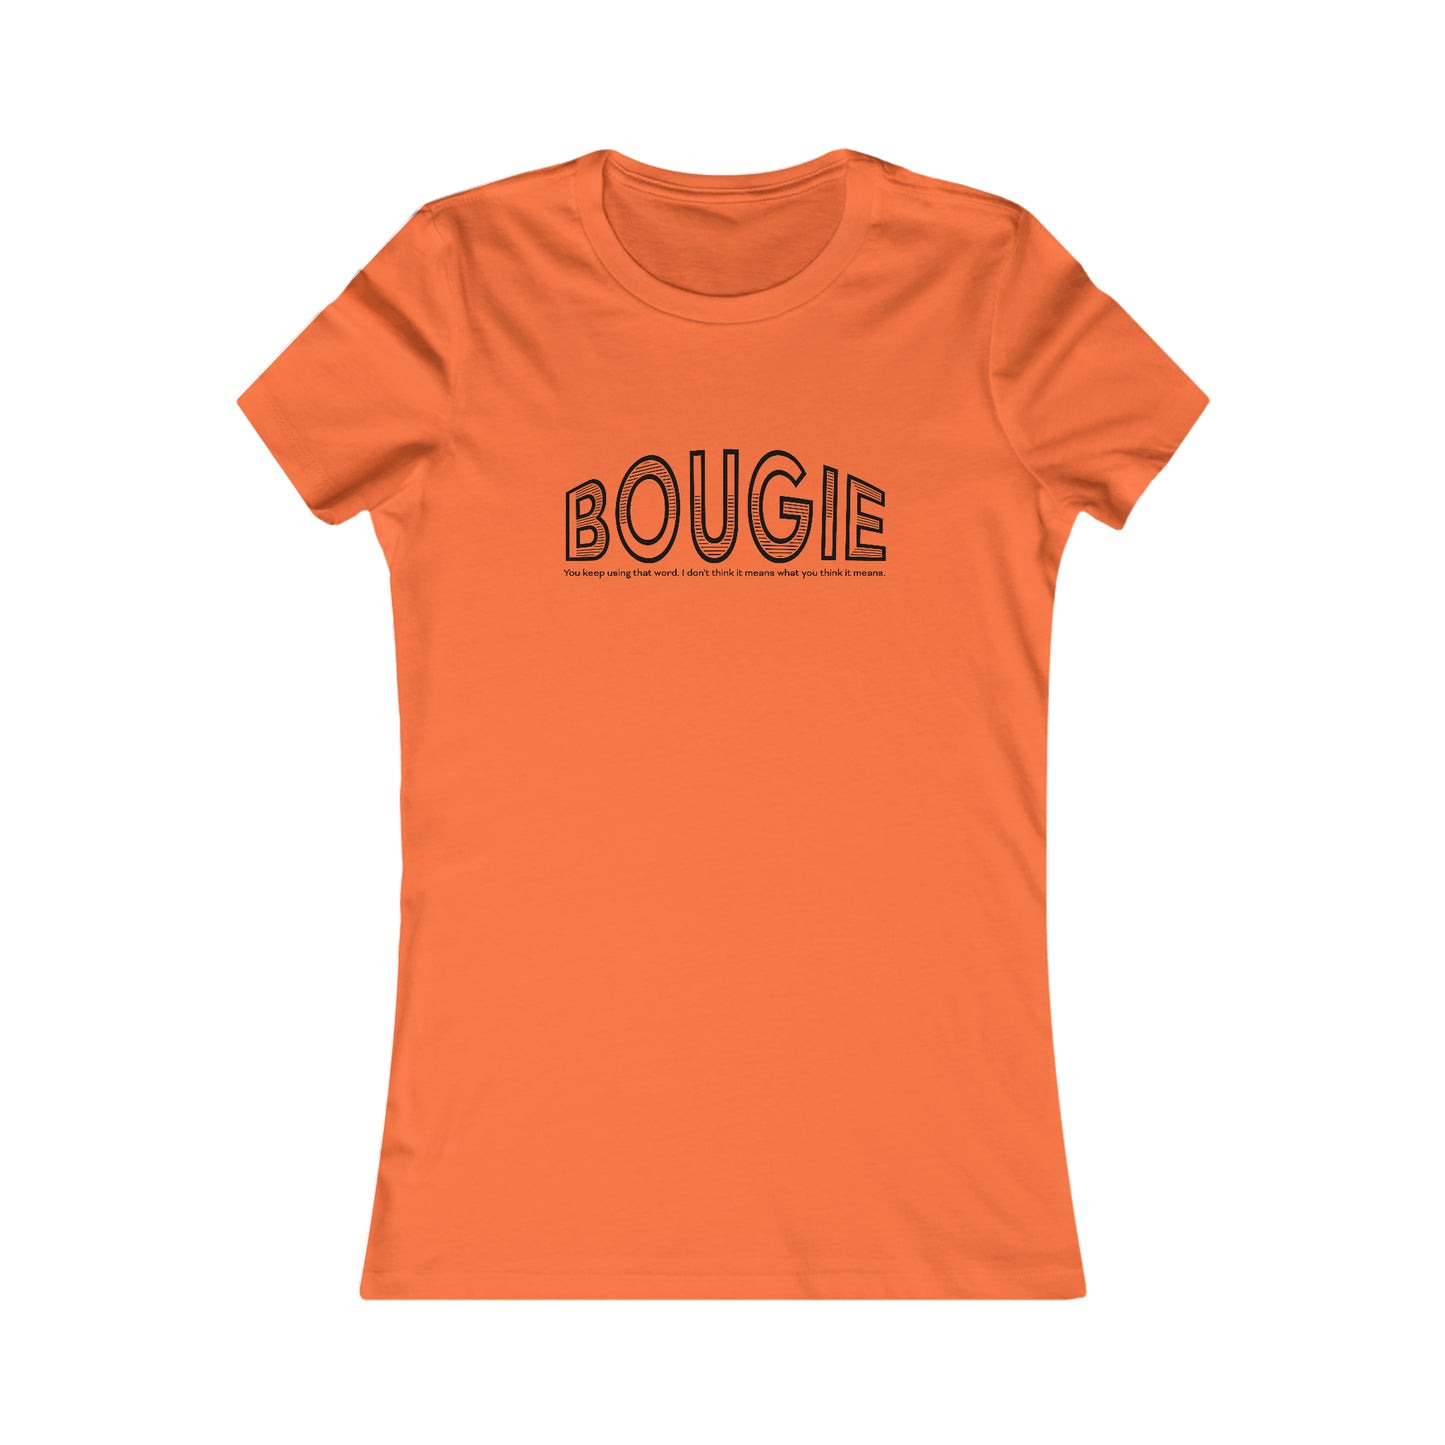 Bougie T-Shirt For Bourgeois TShirt For French Word T Shirt For Fake Rich Shirt For Middle Class TShirt For  Conservative T-Shirt For Materialistic Women